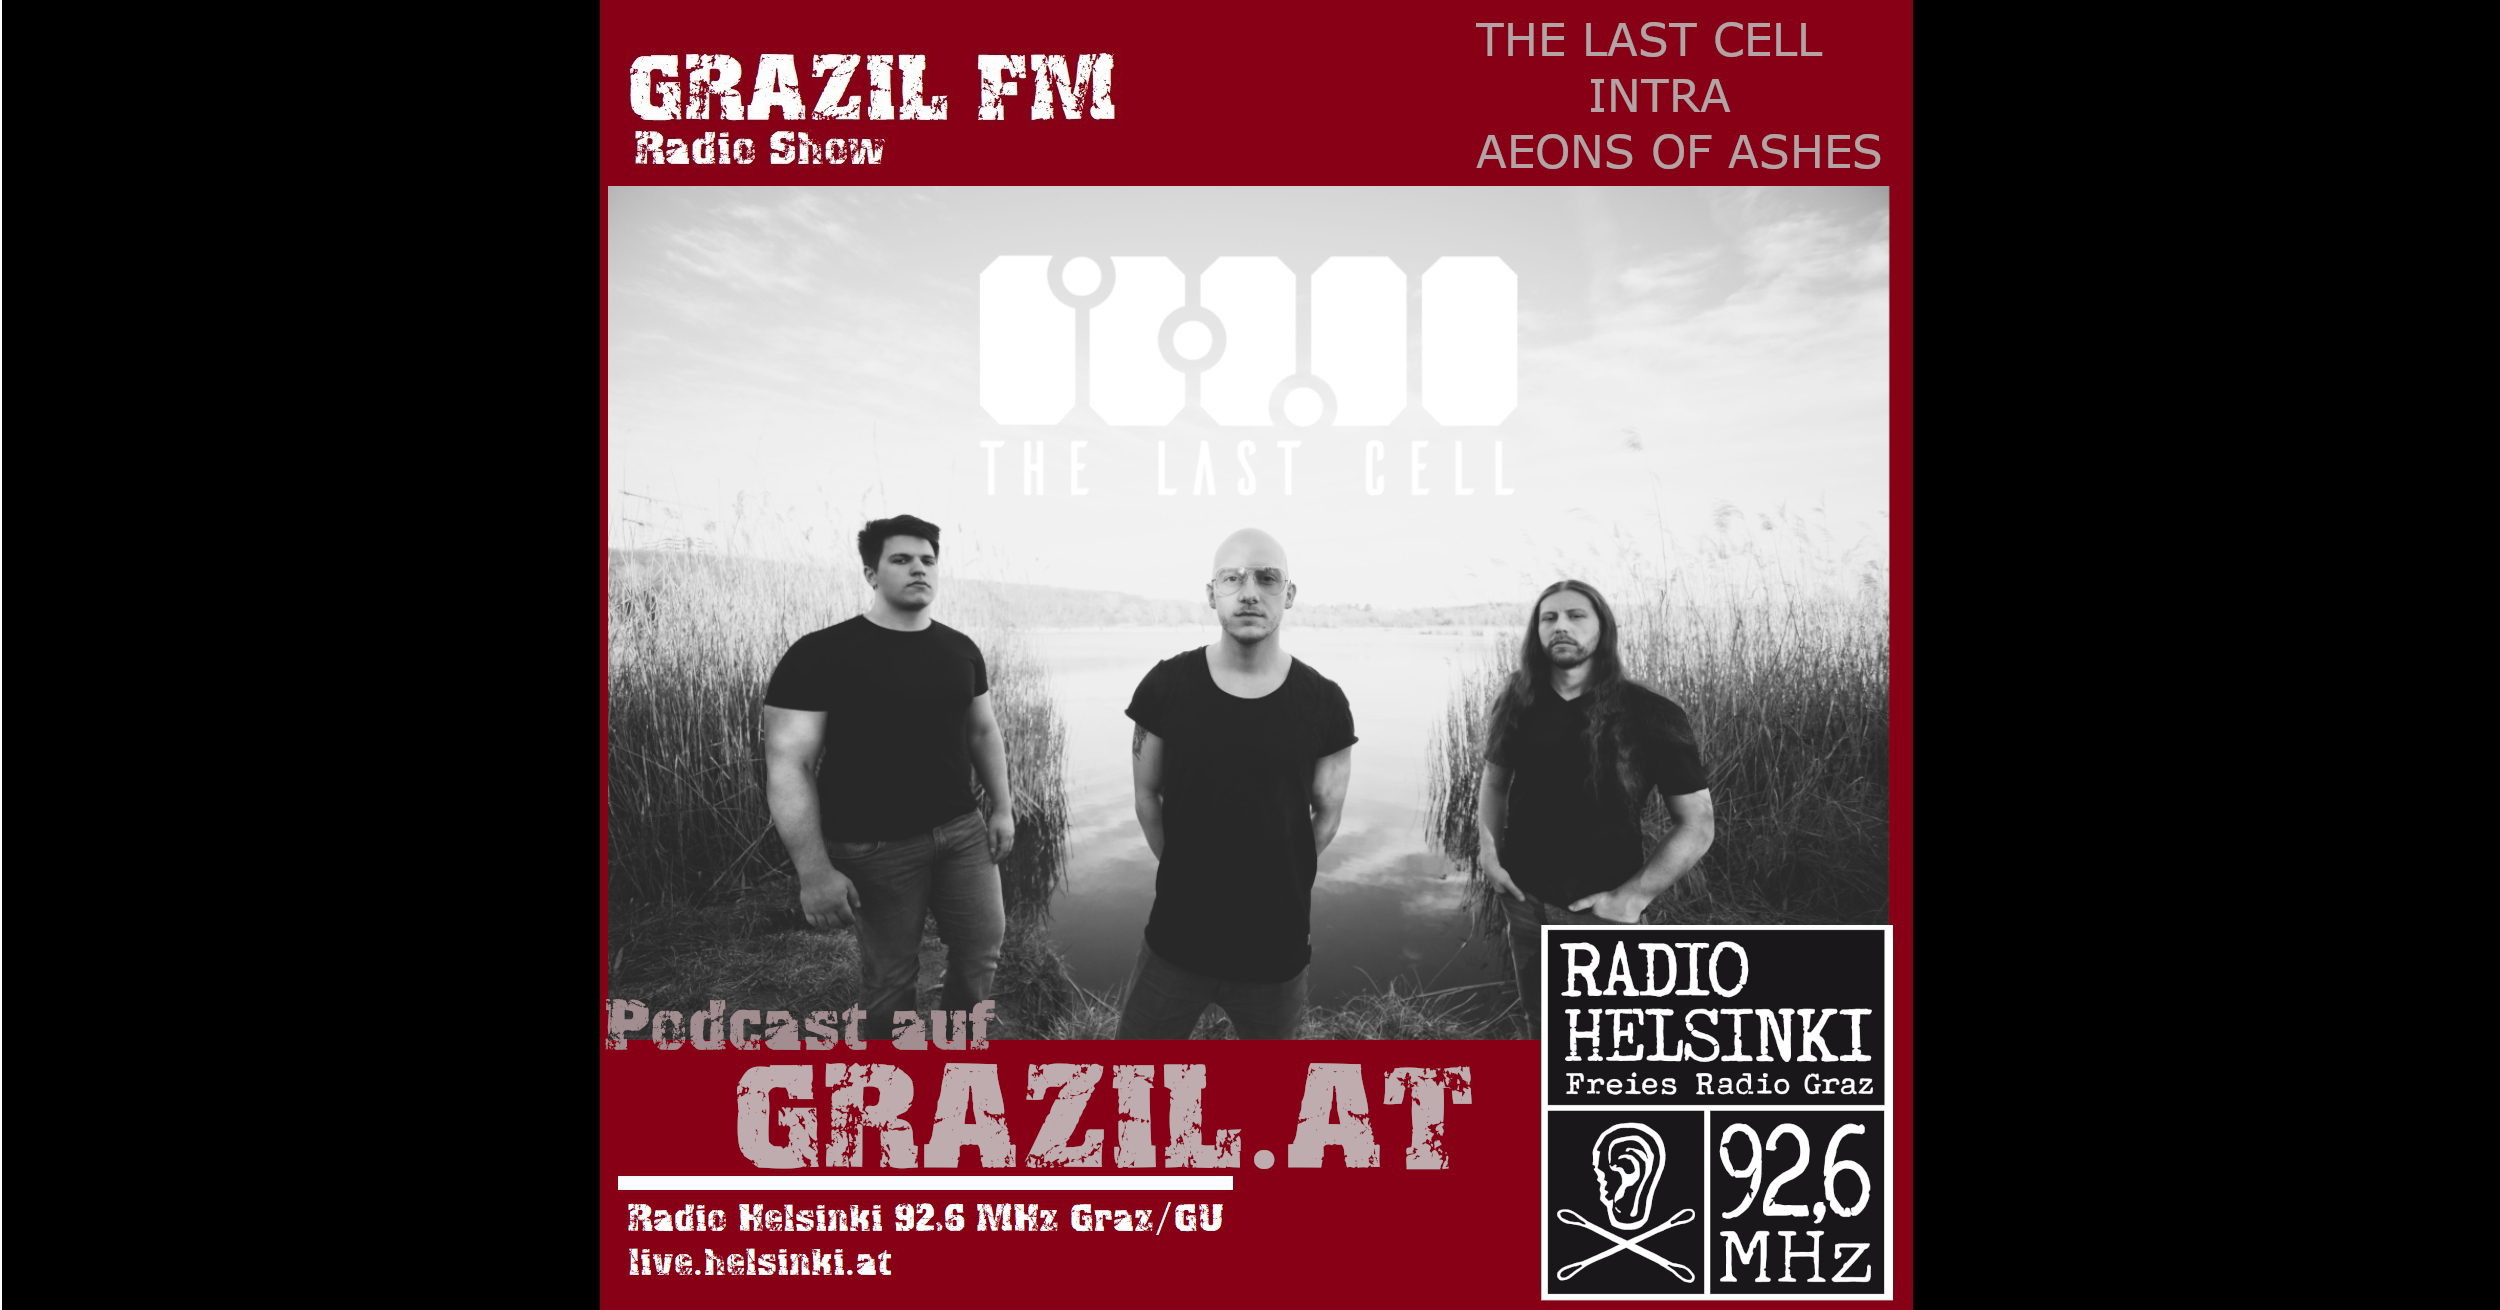 grazil FM Podcast mit The Last Cell